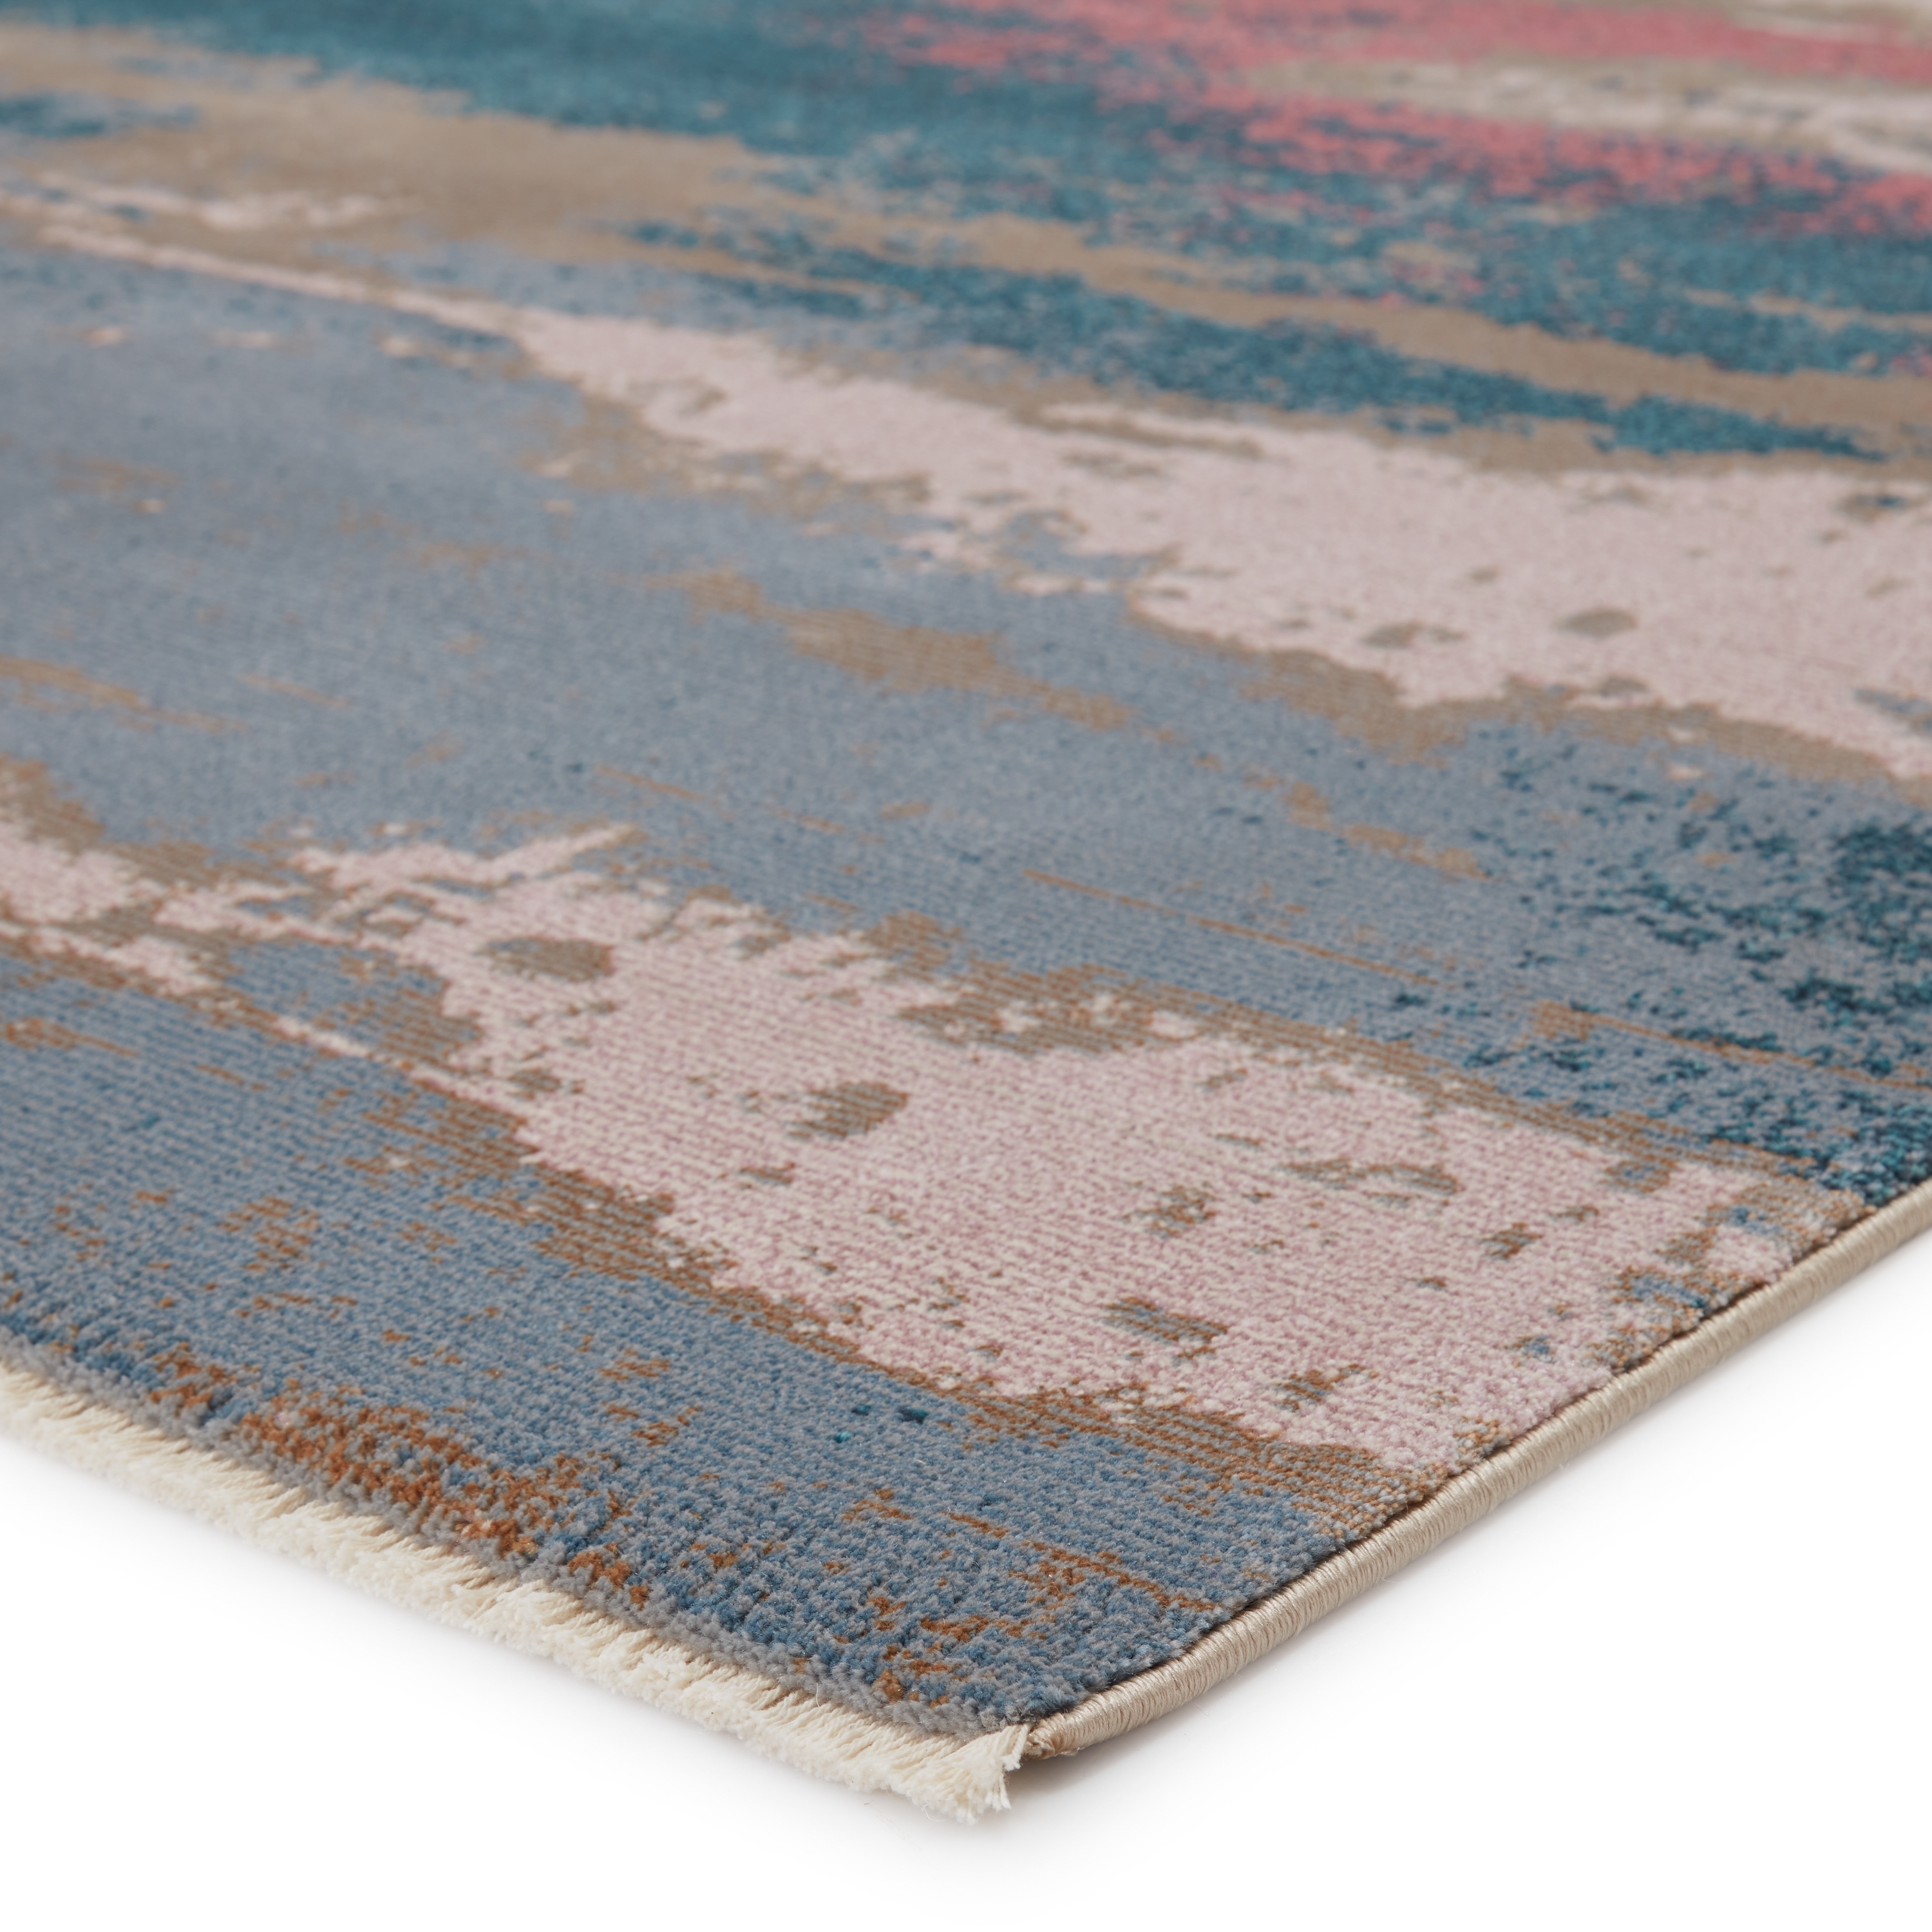 Vibe by Helene Abstract Multicolor Area Rug (7'10"X11'1") - Image 1